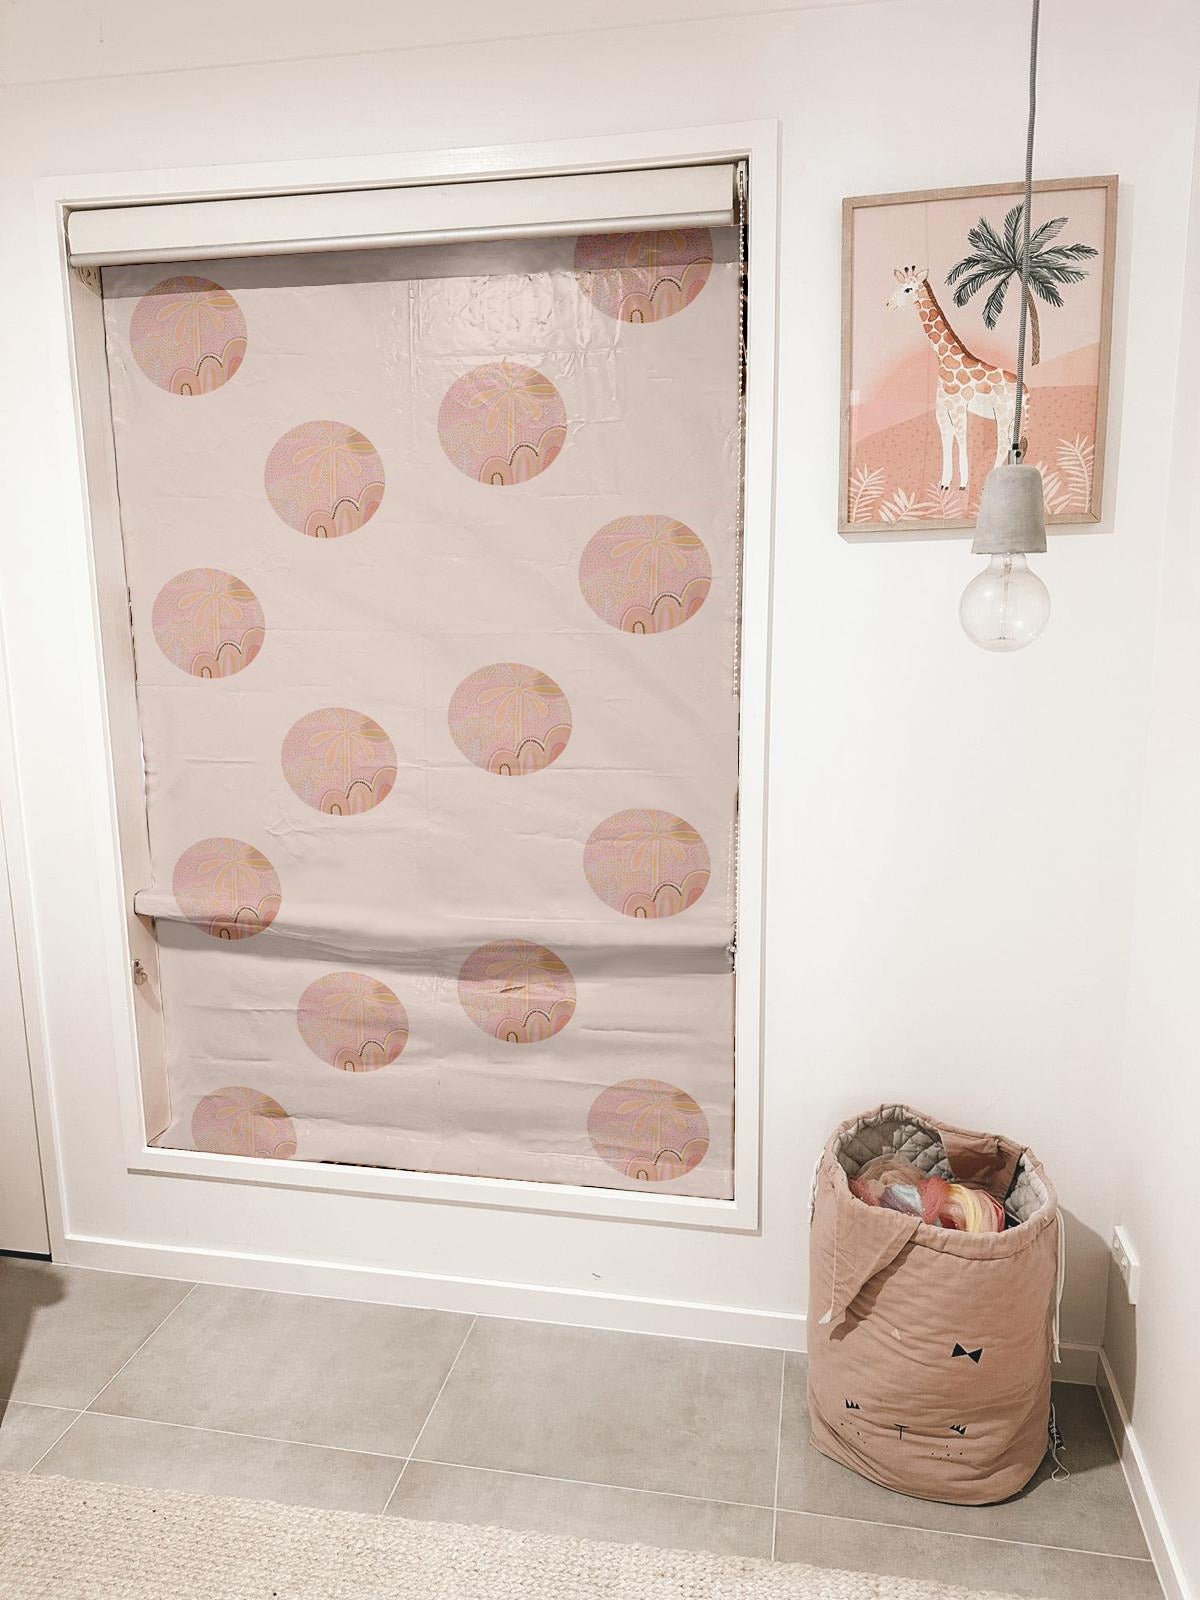 PRE ORDER - Mahalo Eco Blackout Blinds (Green or Pink Style) - Little Kids Business